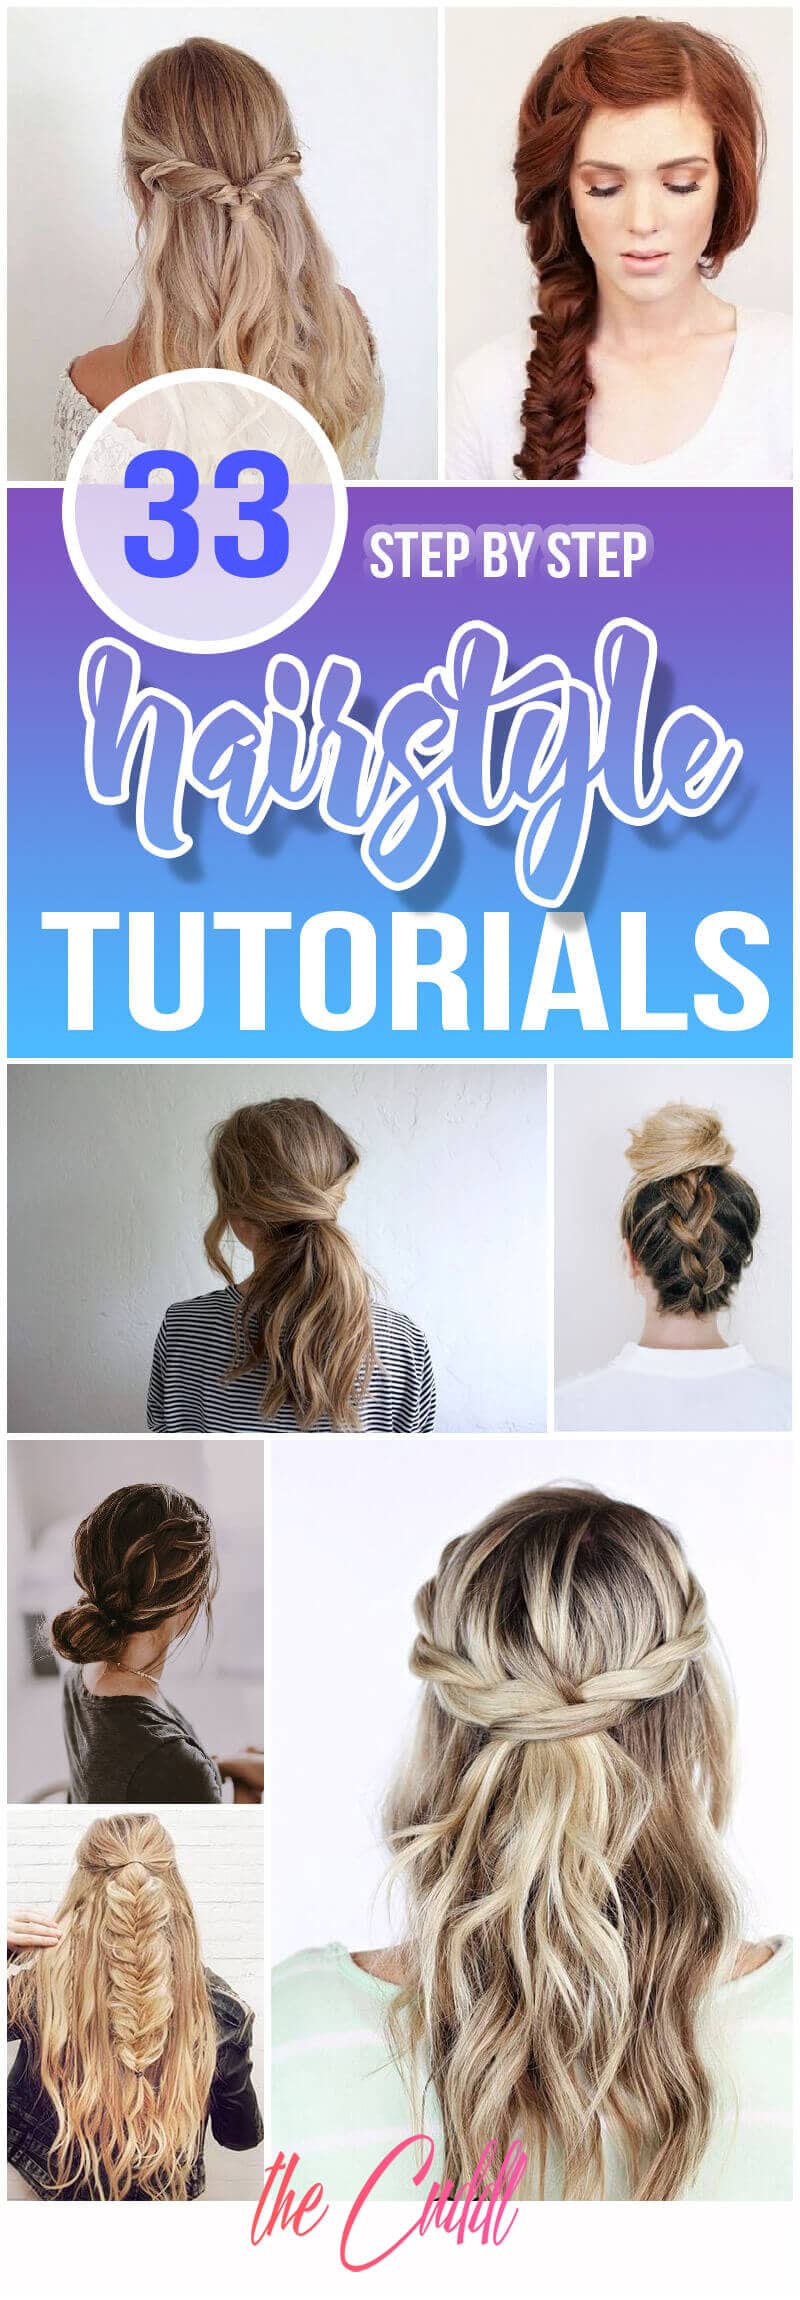 33 Most Popular Step By Step Hairstyle Tutorials